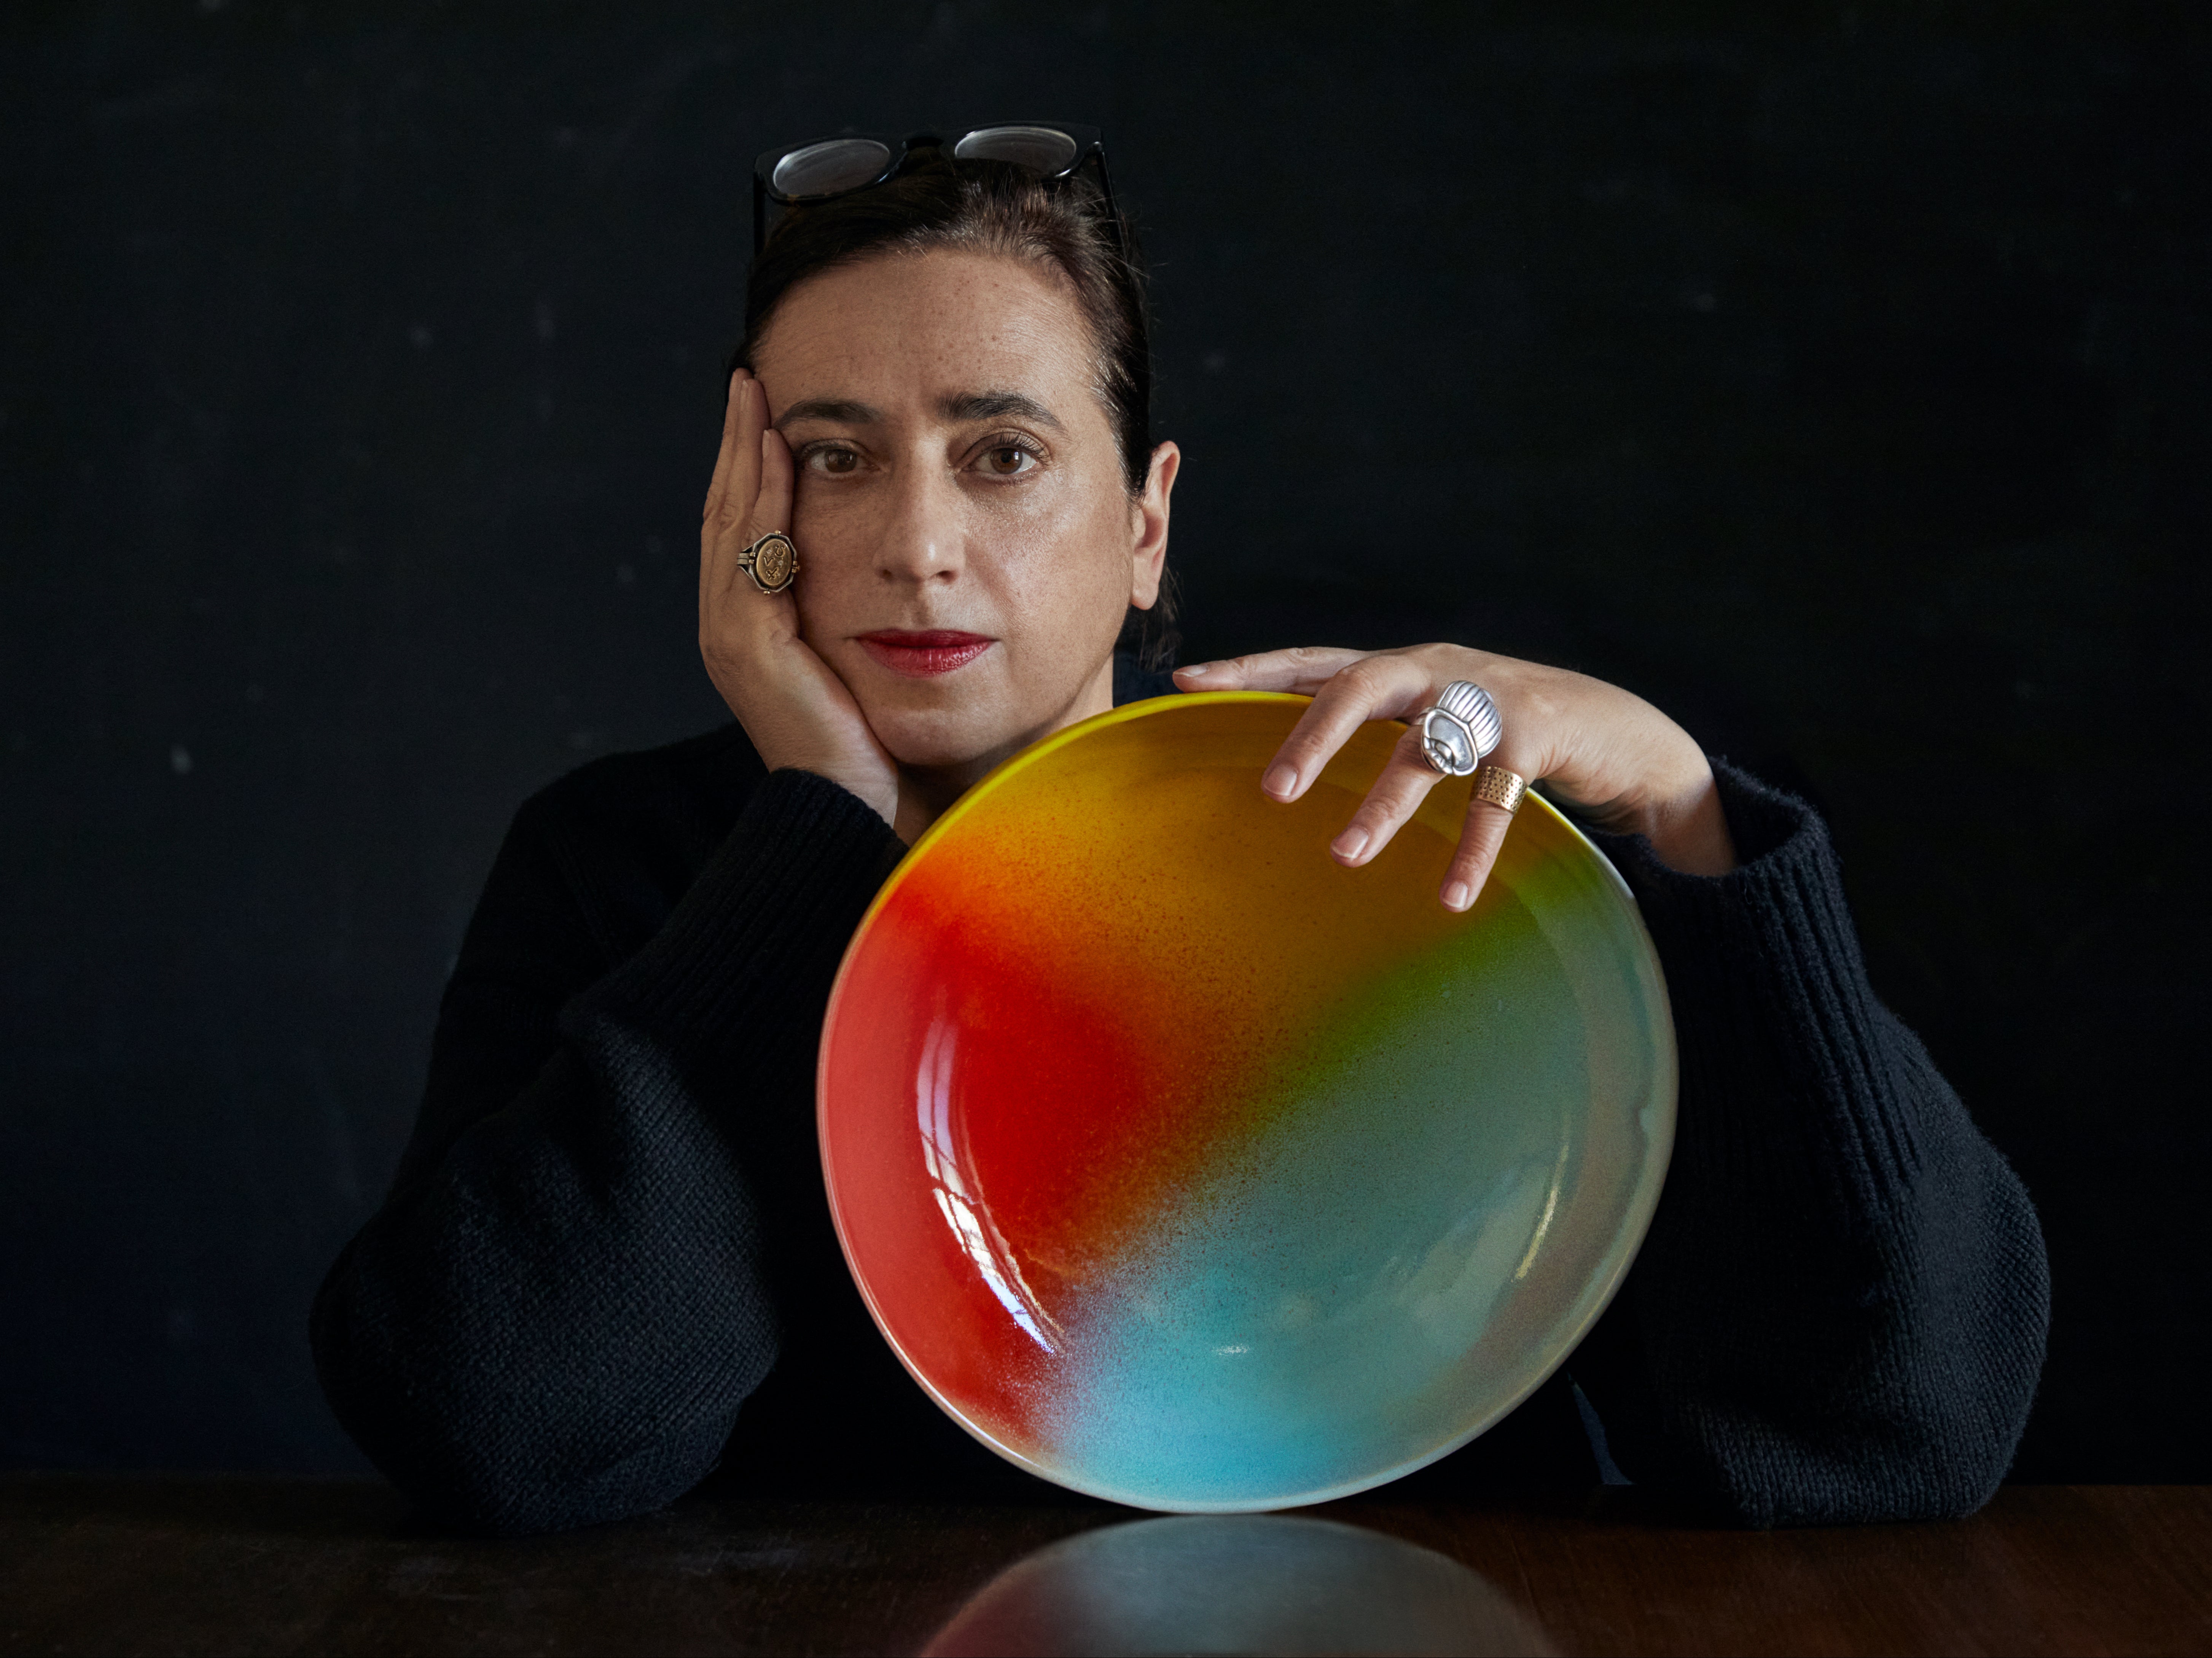 India Mahdavi with a rainbow plate from the collection